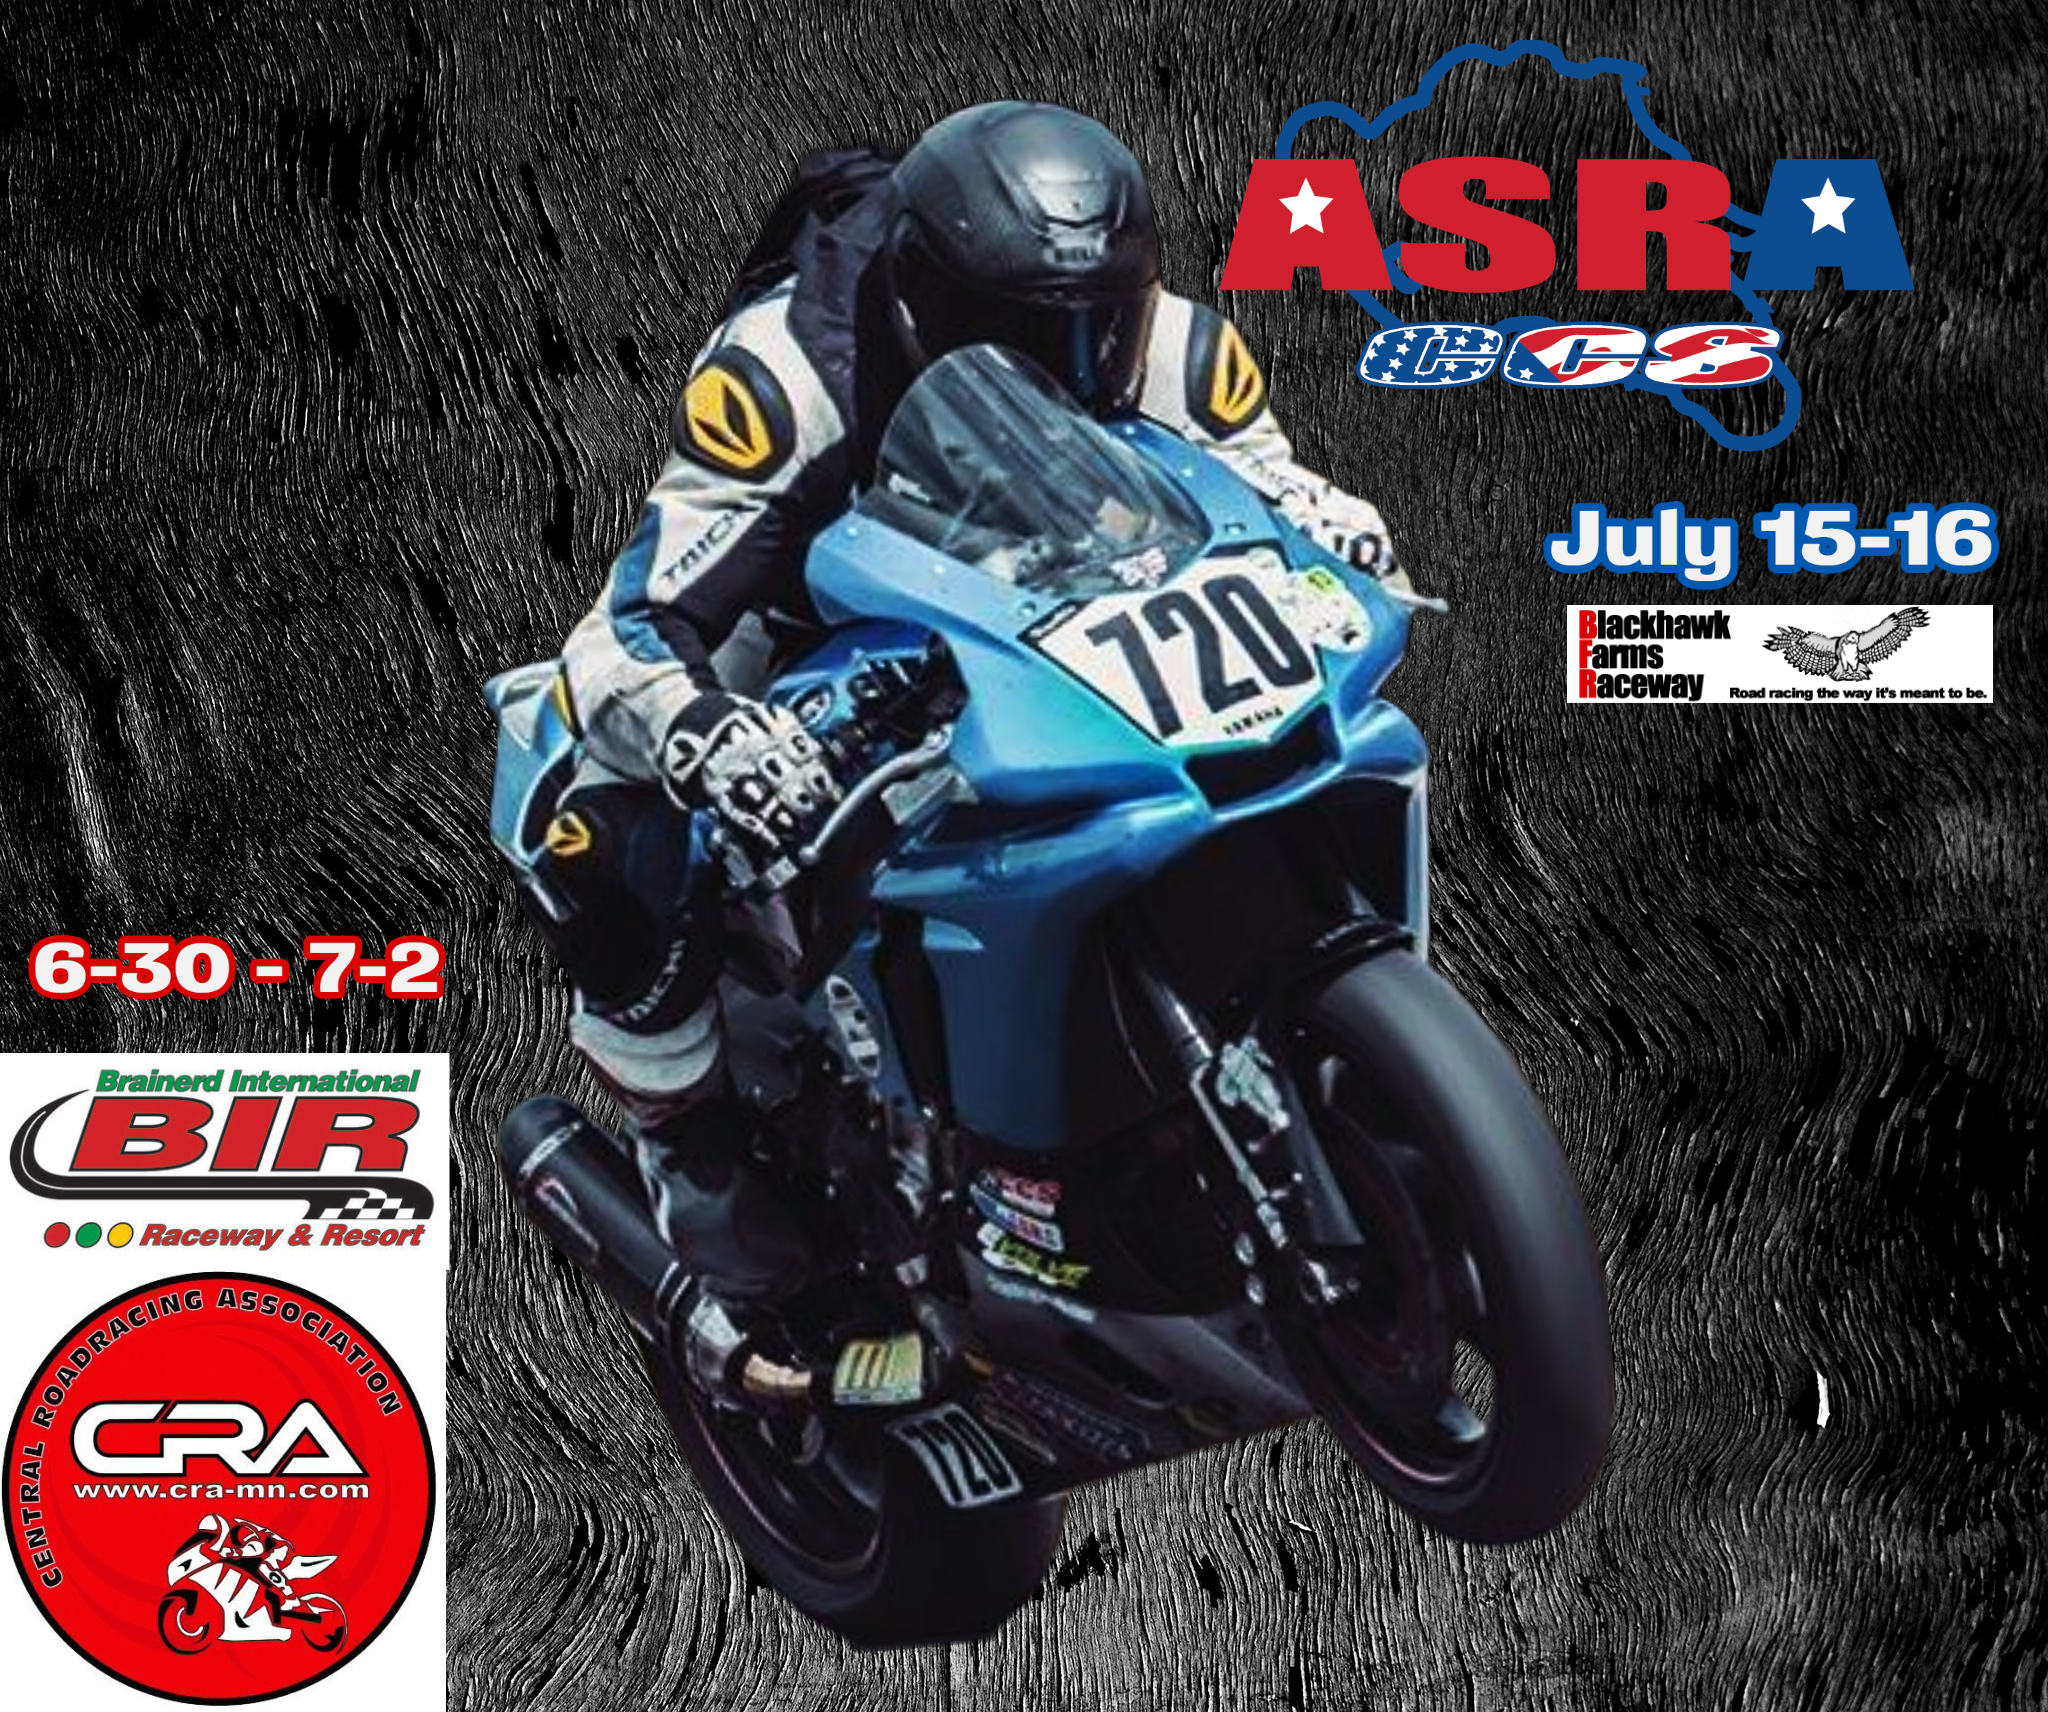 Read more about the article ASRA and CRA Partner for Co-Hosted Racing Events in 2023.